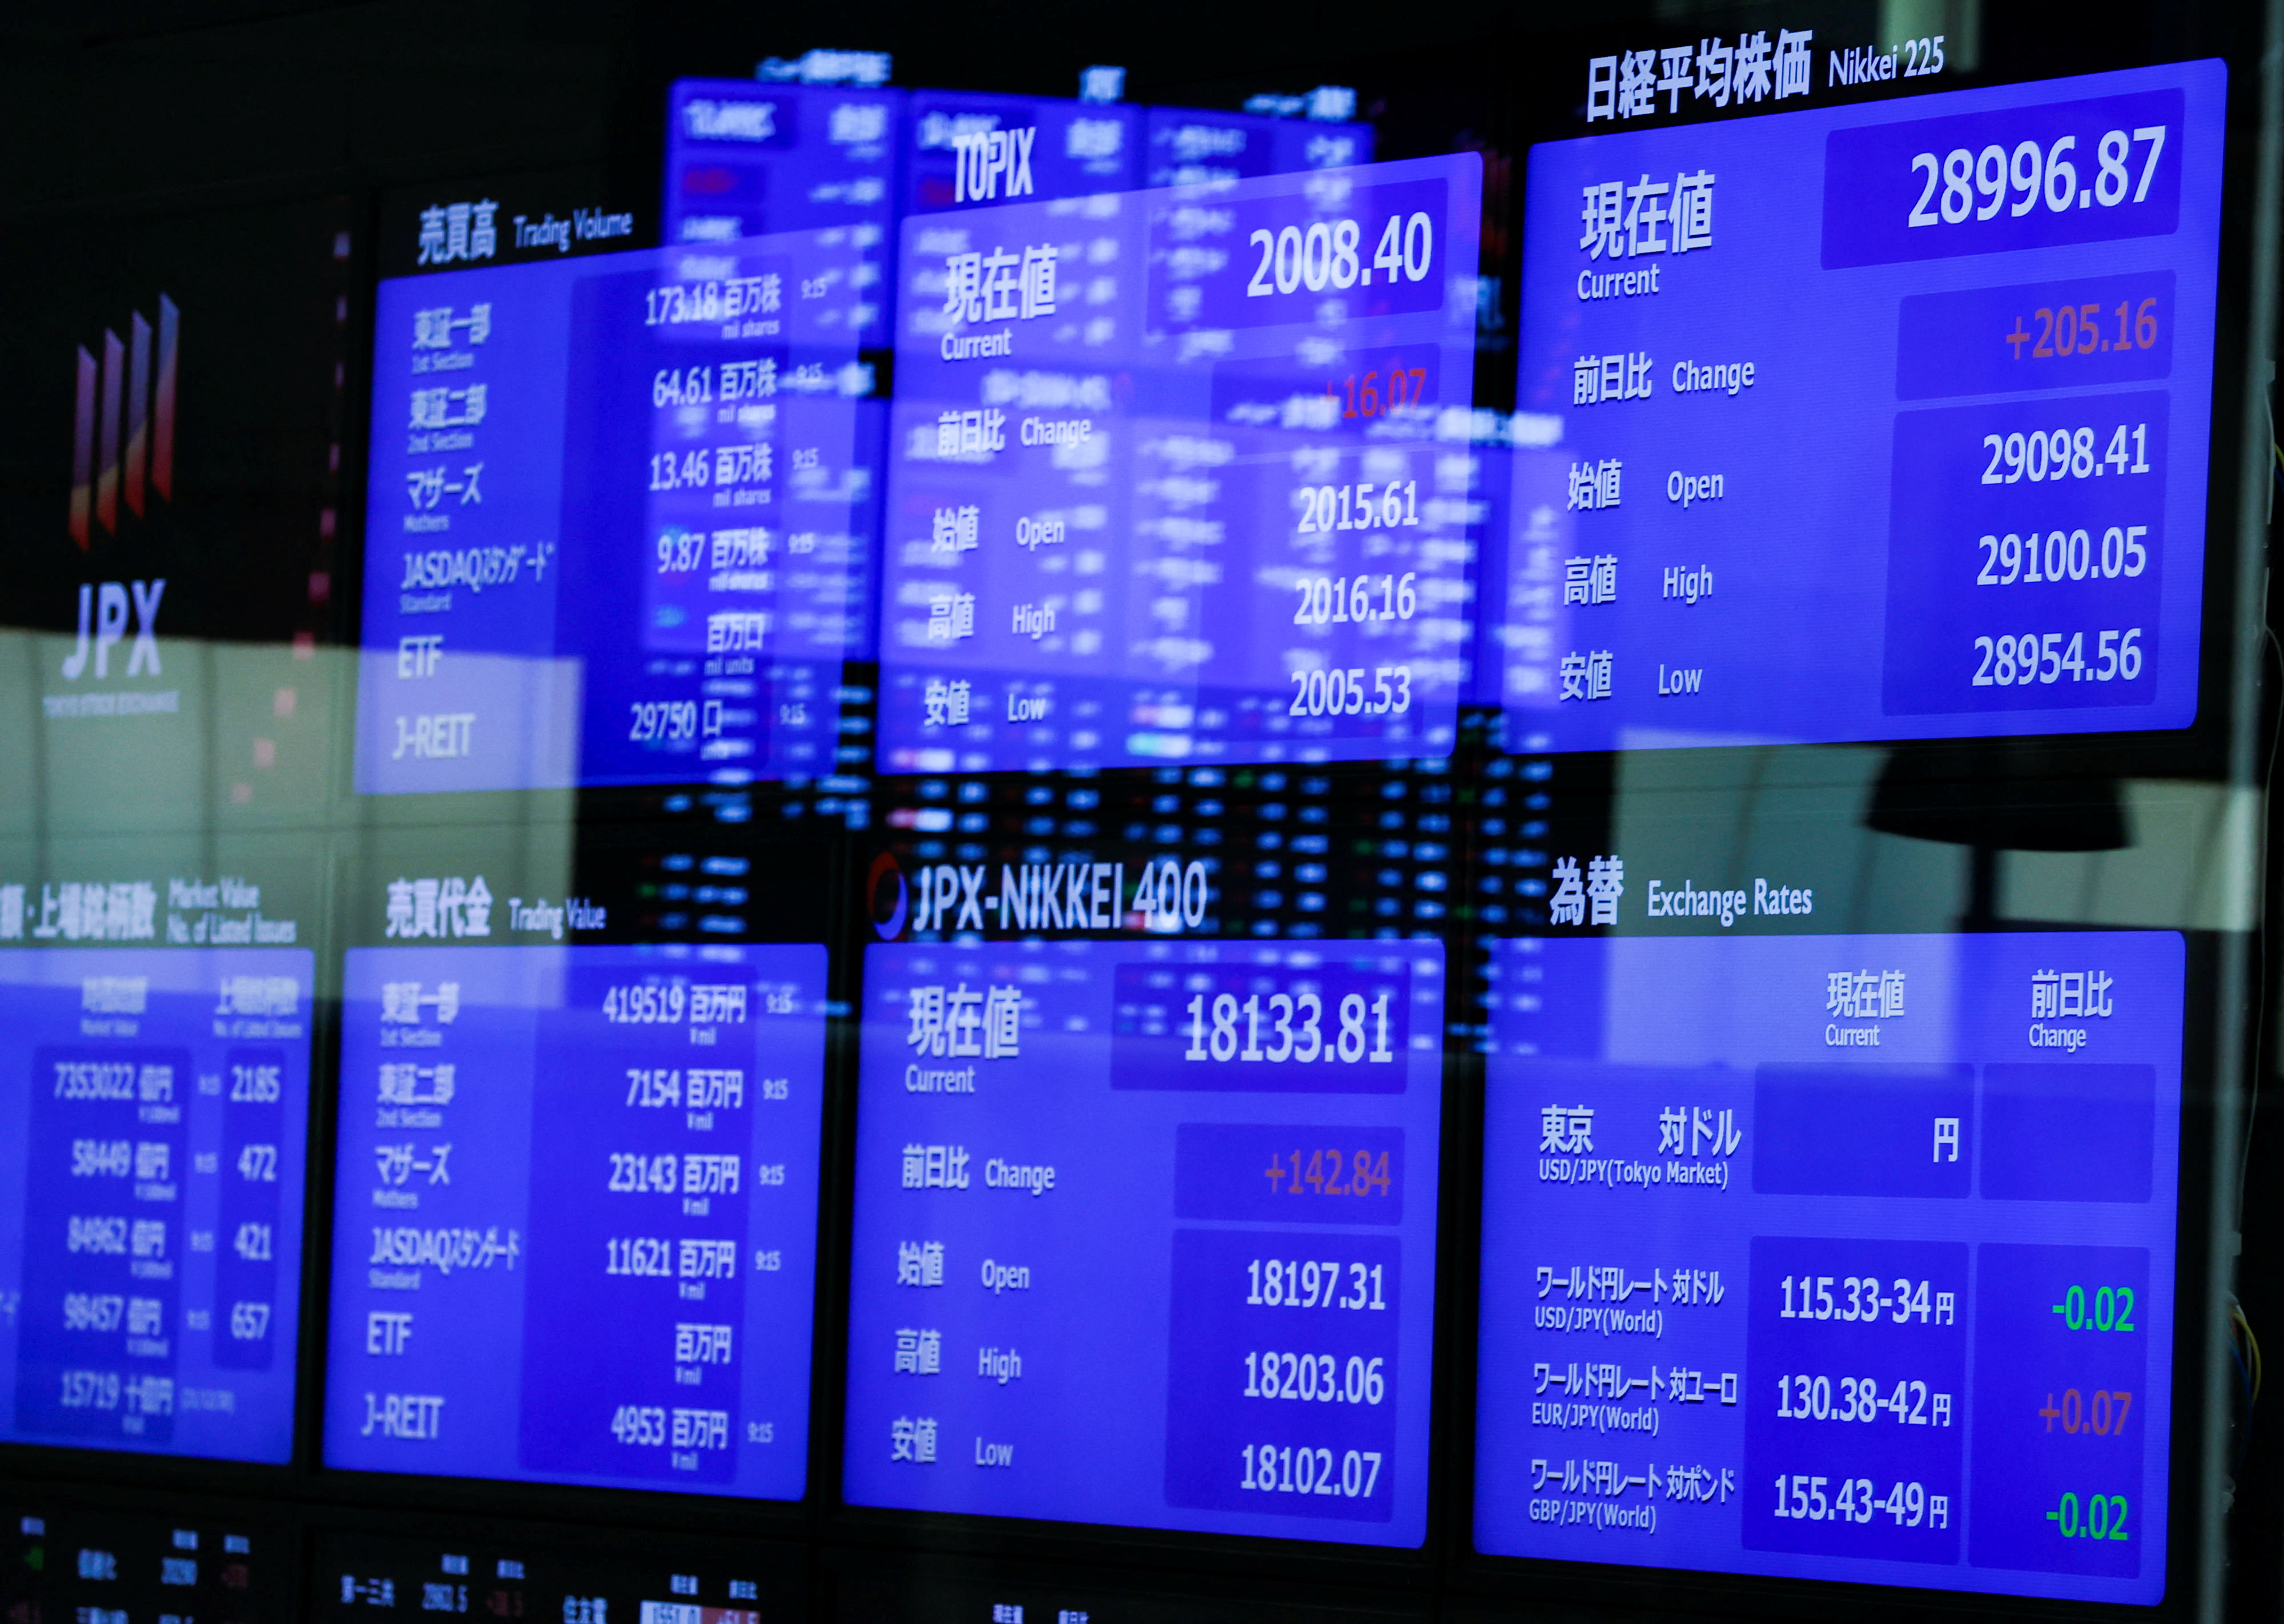 Monitors displaying the stock index prices and Japanese yen exchange rate against the U.S. dollar are seen after the New Year ceremony marking the opening of trading in 2022 at the Tokyo Stock Exchange (TSE), amid the coronavirus disease (COVID-19) pandemic, in Tokyo, Japan January 4, 2022. REUTERS/Issei Kato 